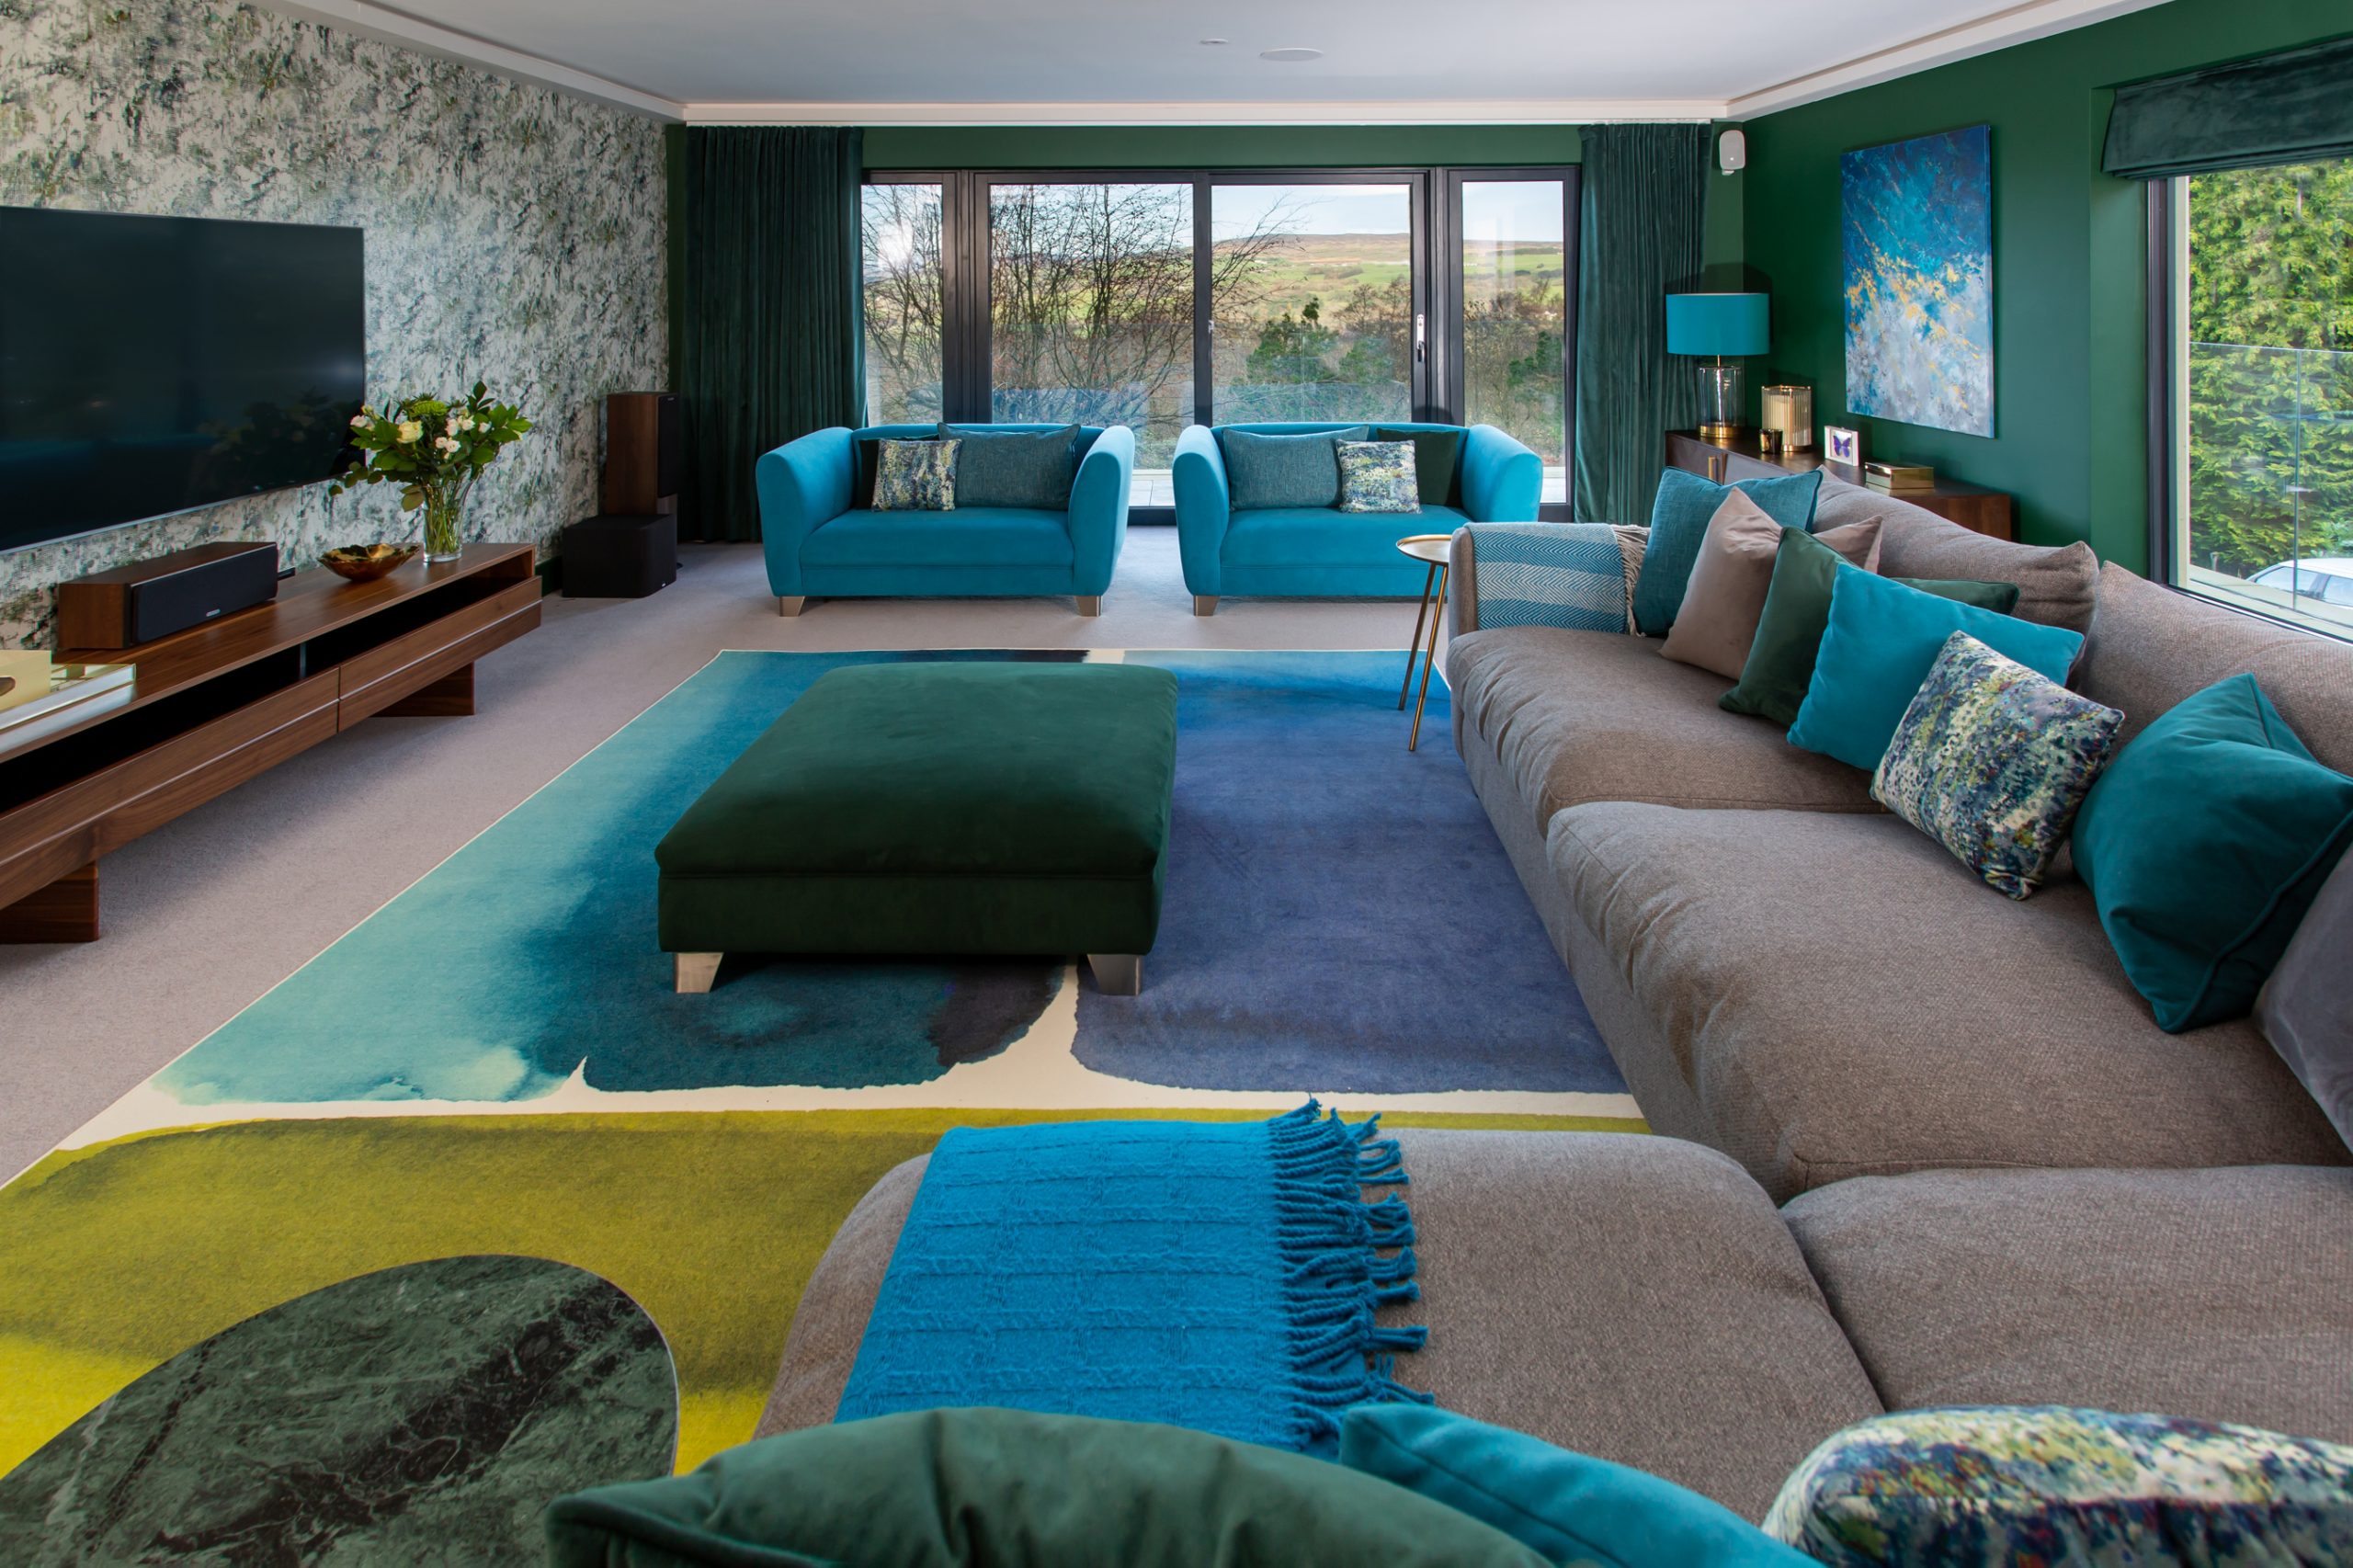 Contemporary living room, green walls, botanical wallpaper and rug reflecting the greens and blues in the room